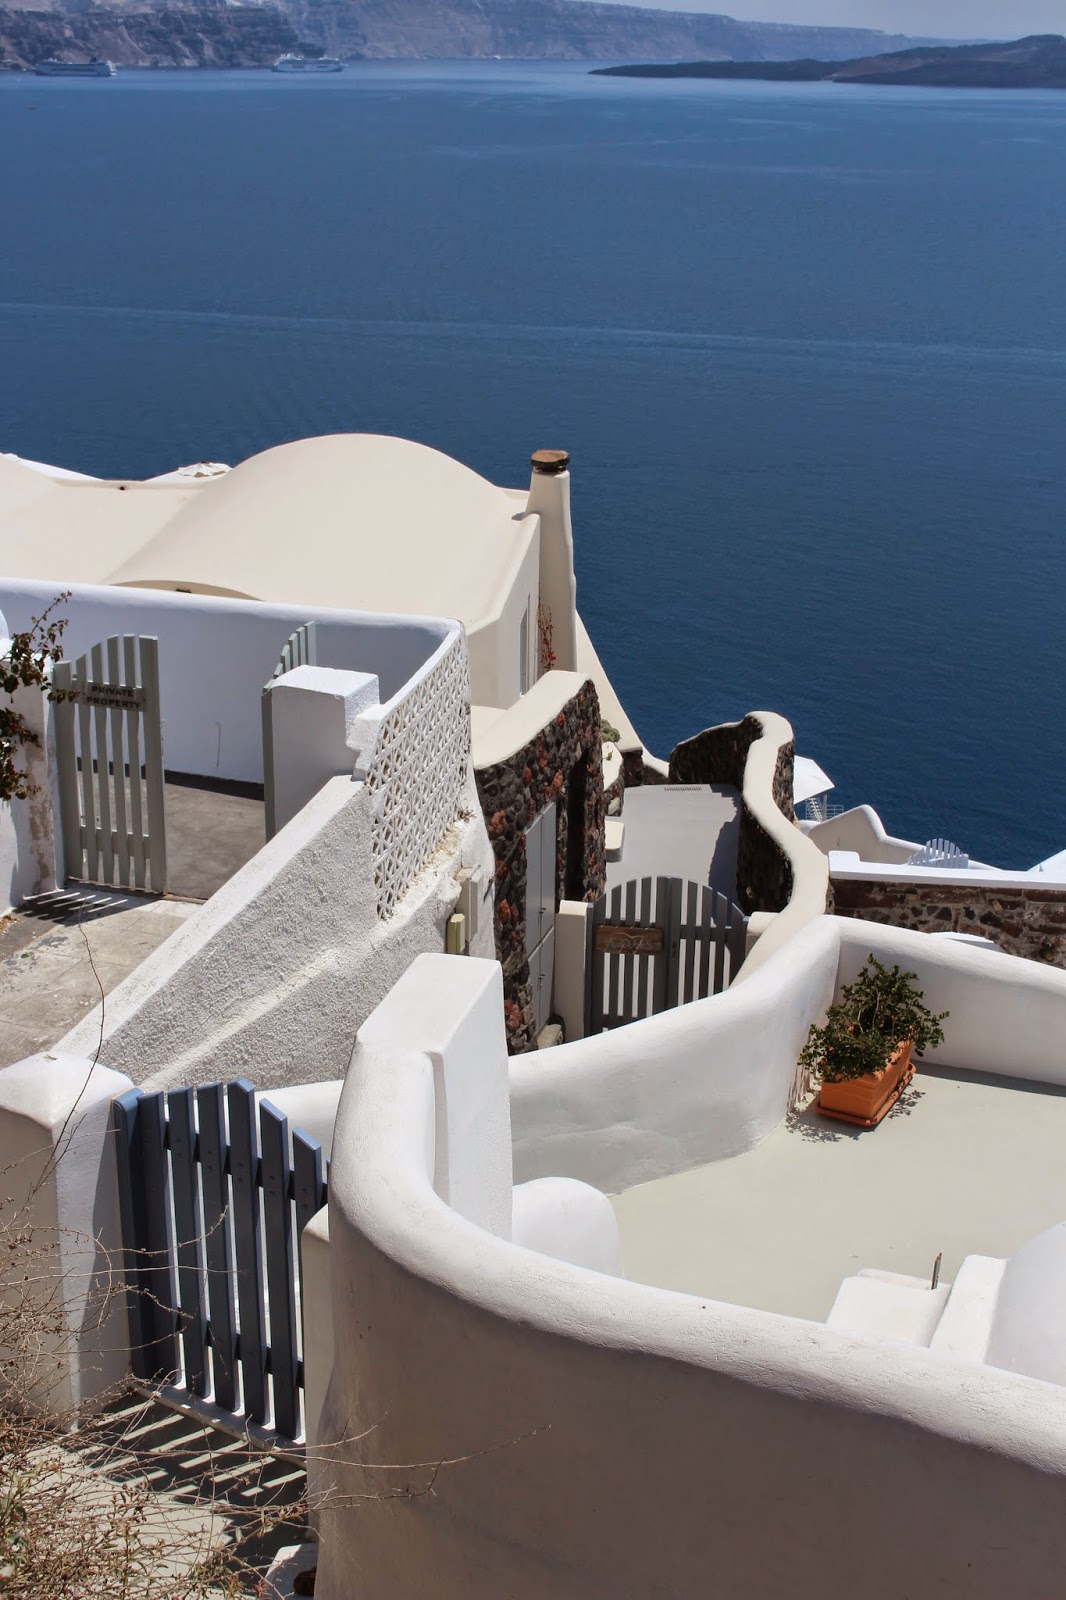 Oia and Pezoules: Where to stay on the Island of Santorini